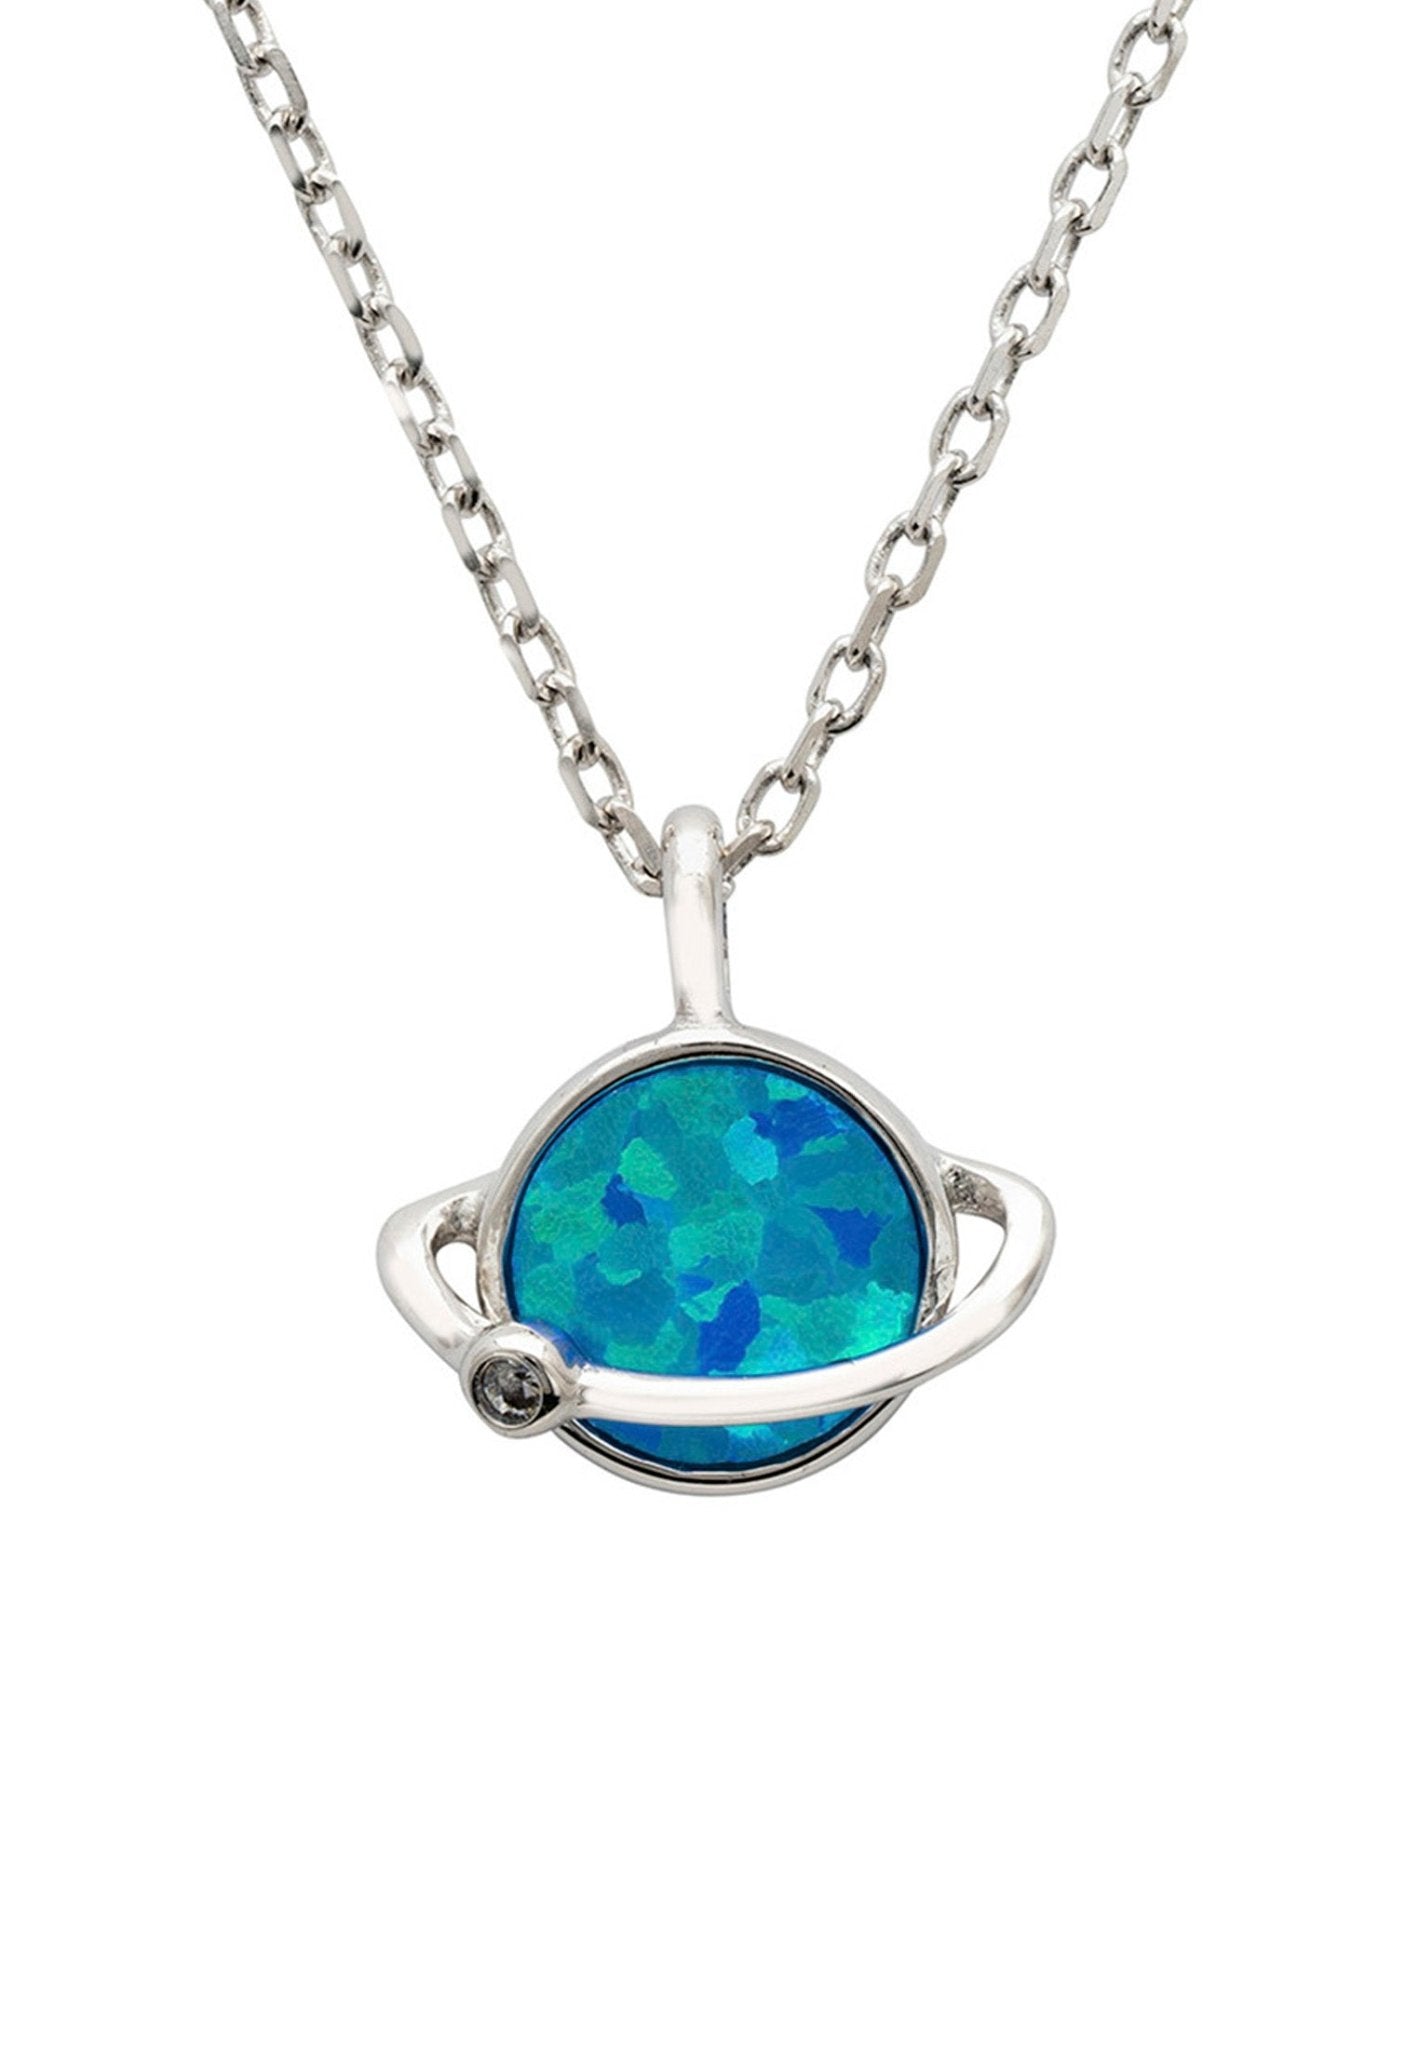 Saturn Galactic Opalite Necklace Silver - LATELITA Necklaces